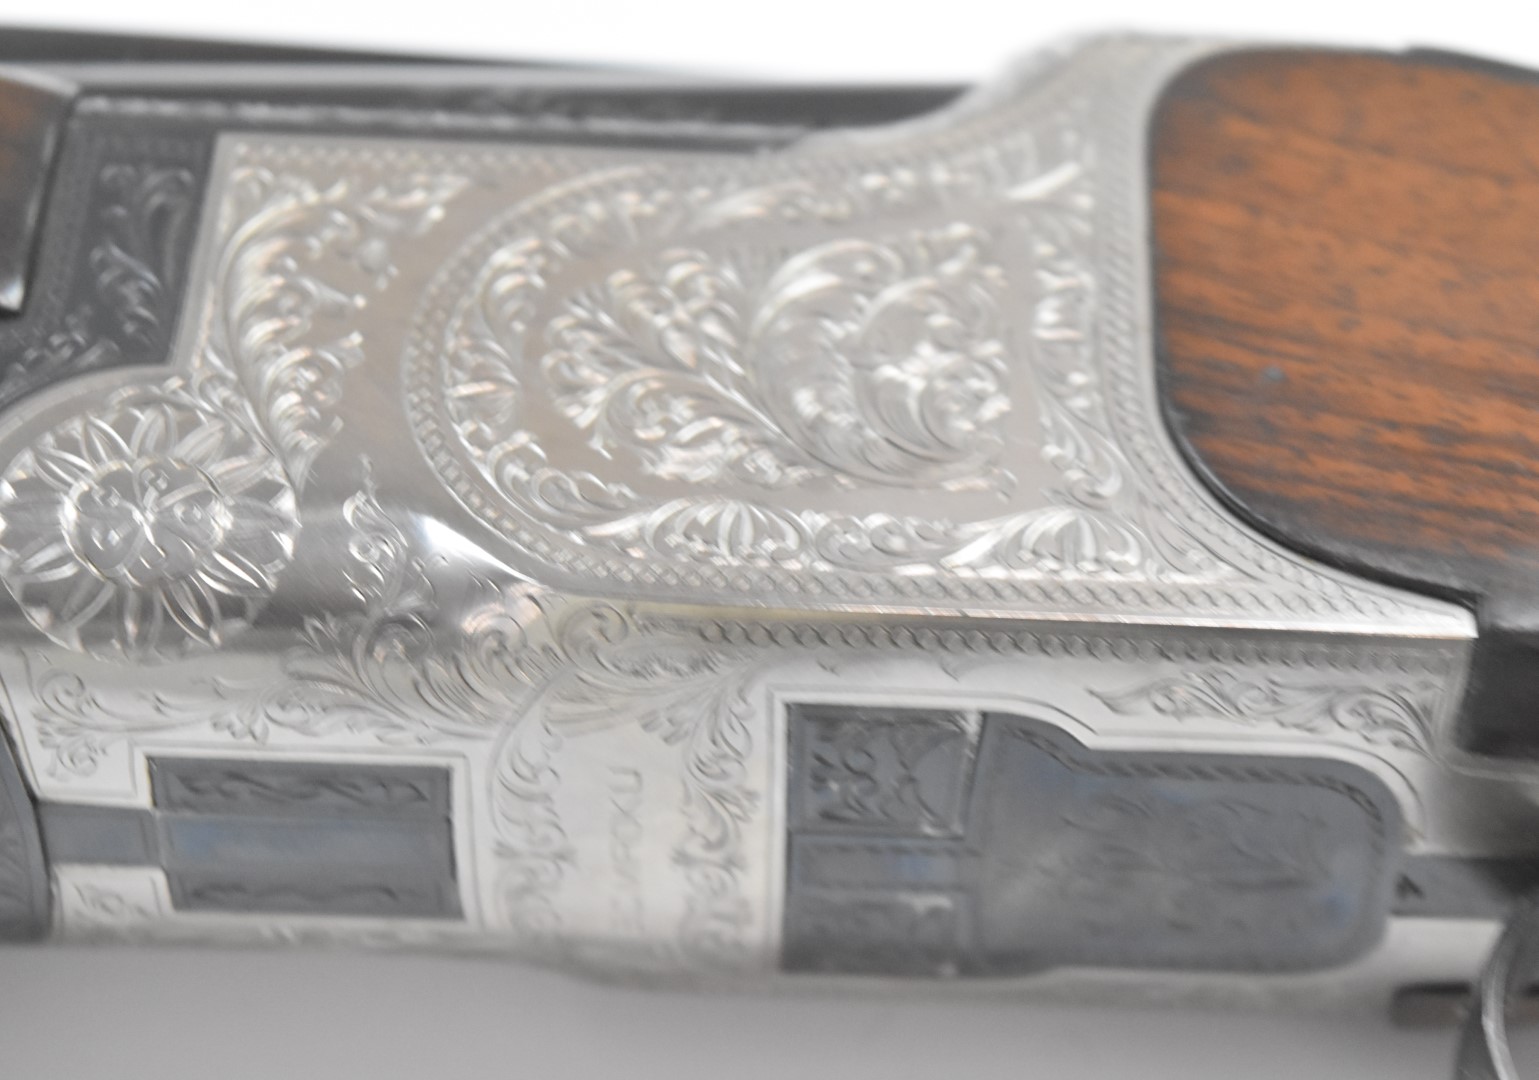 Miroku 12 bore over and under ejector shotgun with engraved locks, underside, trigger guard, top - Image 11 of 11